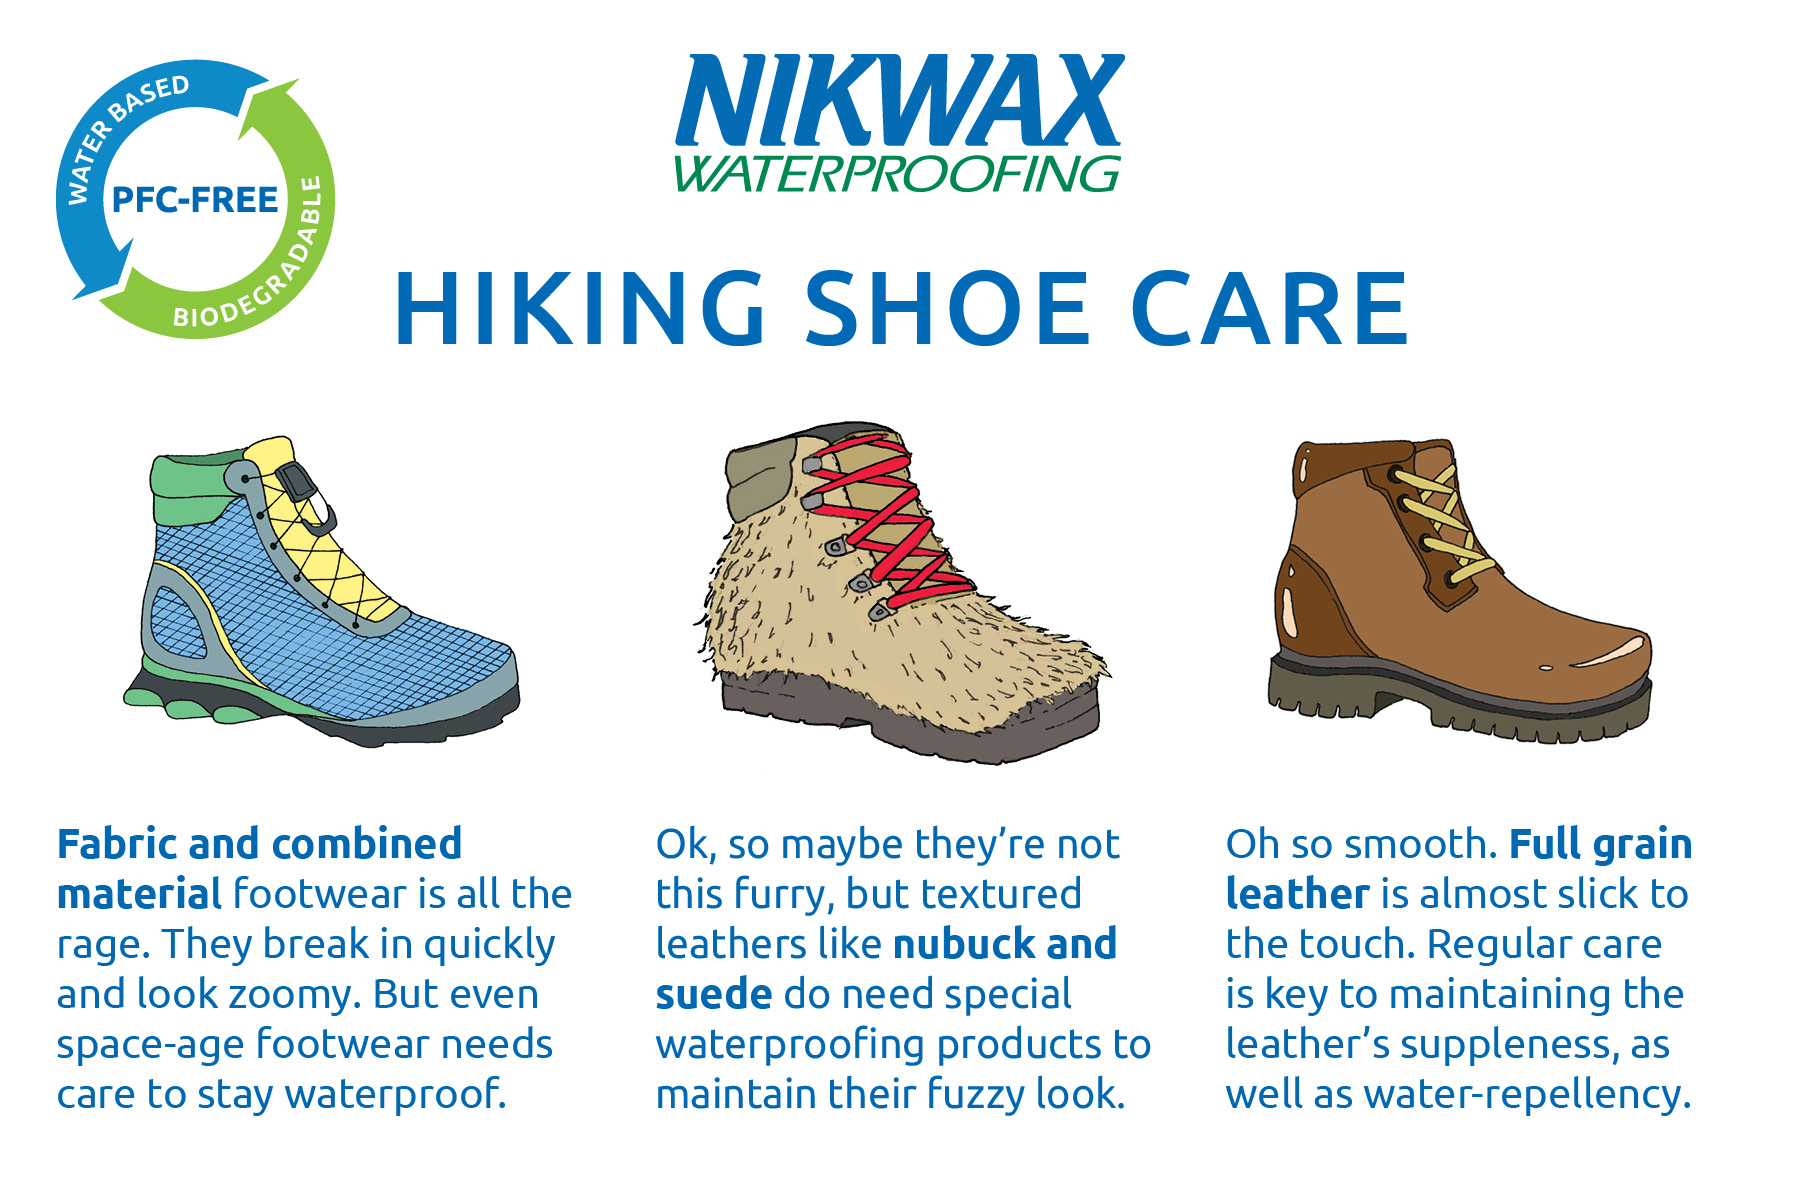 How to Clean \u0026 Waterproof Shoes and Boots